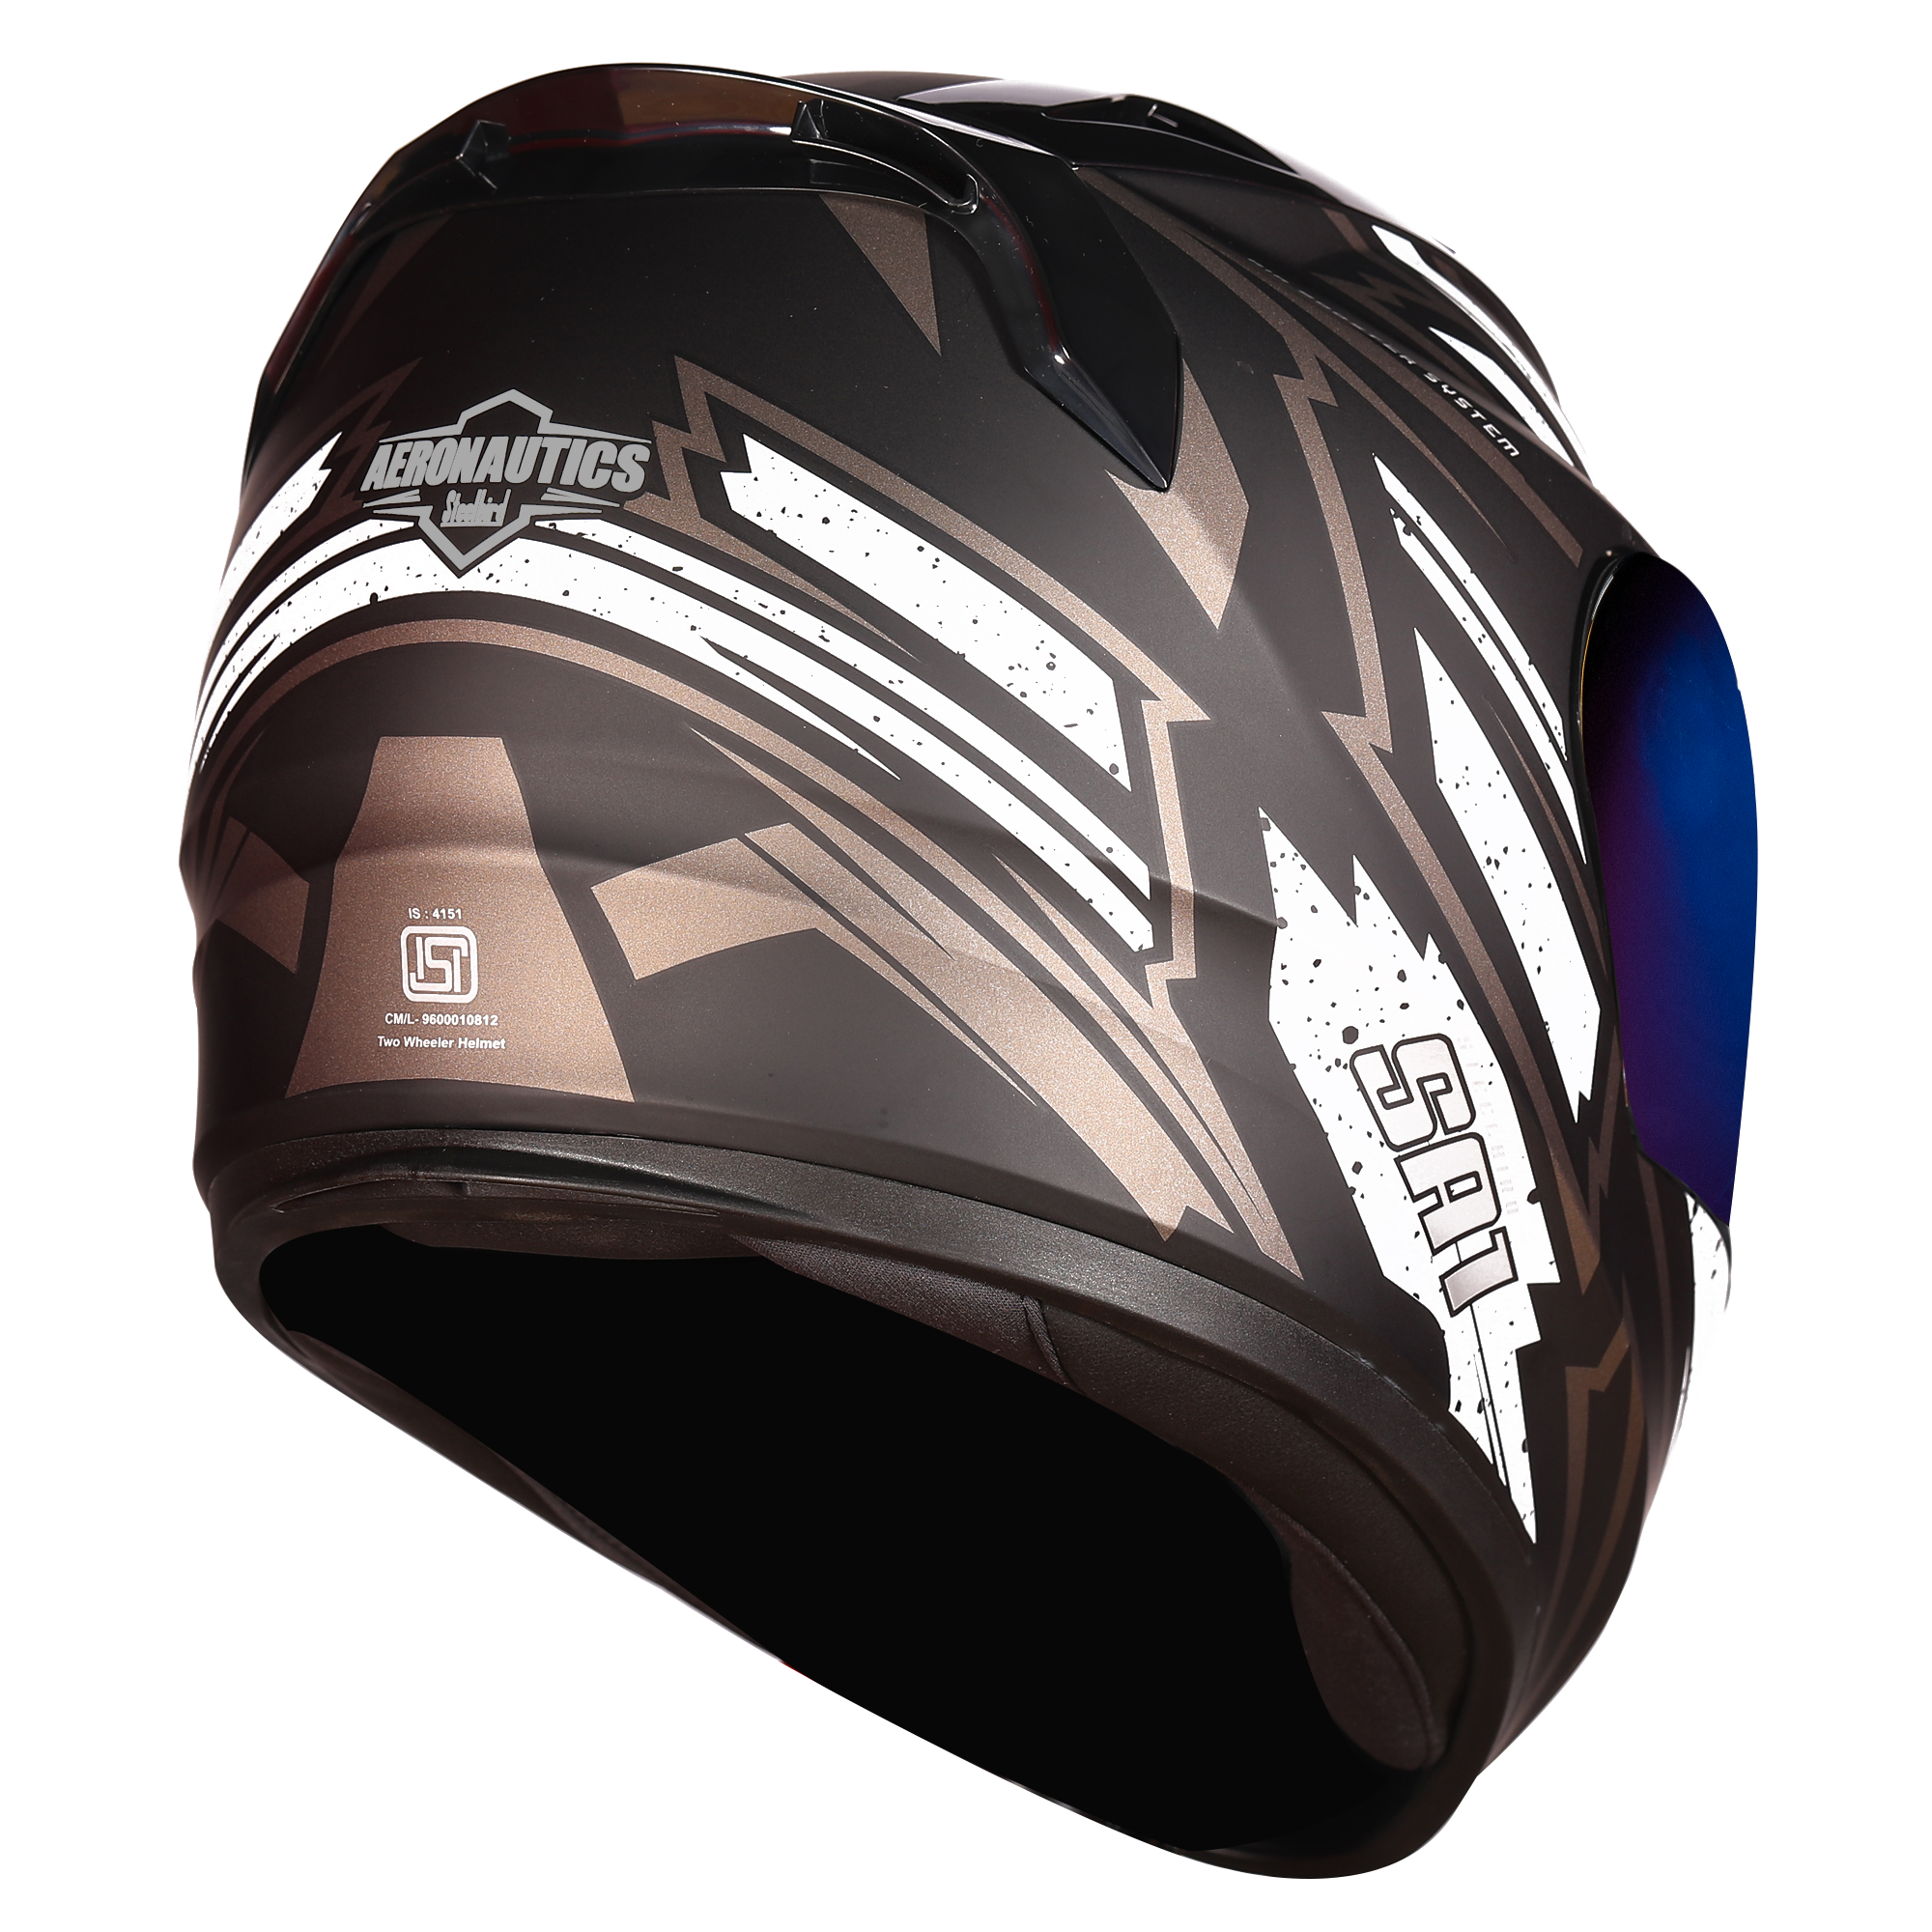 SA-1 BOOSTER MAT BLACK WITH GREY - CHROME BLUE VISOR (WITH EXTRA CLEAR VISOR)